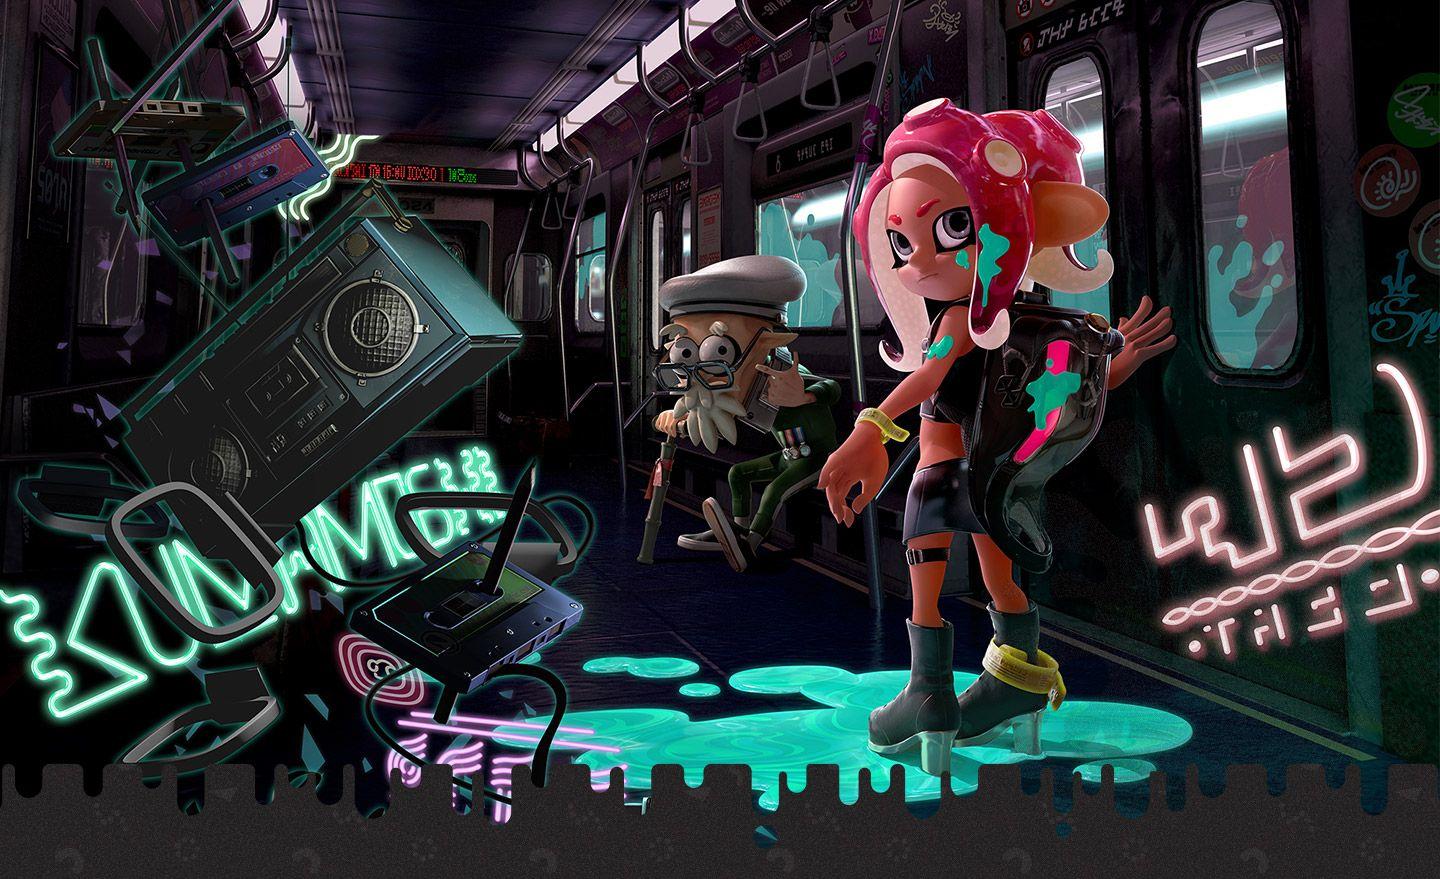 Heres A Splatoon 2 Summer Wallpaper For Your PC And Smartphone   NintendoSoup